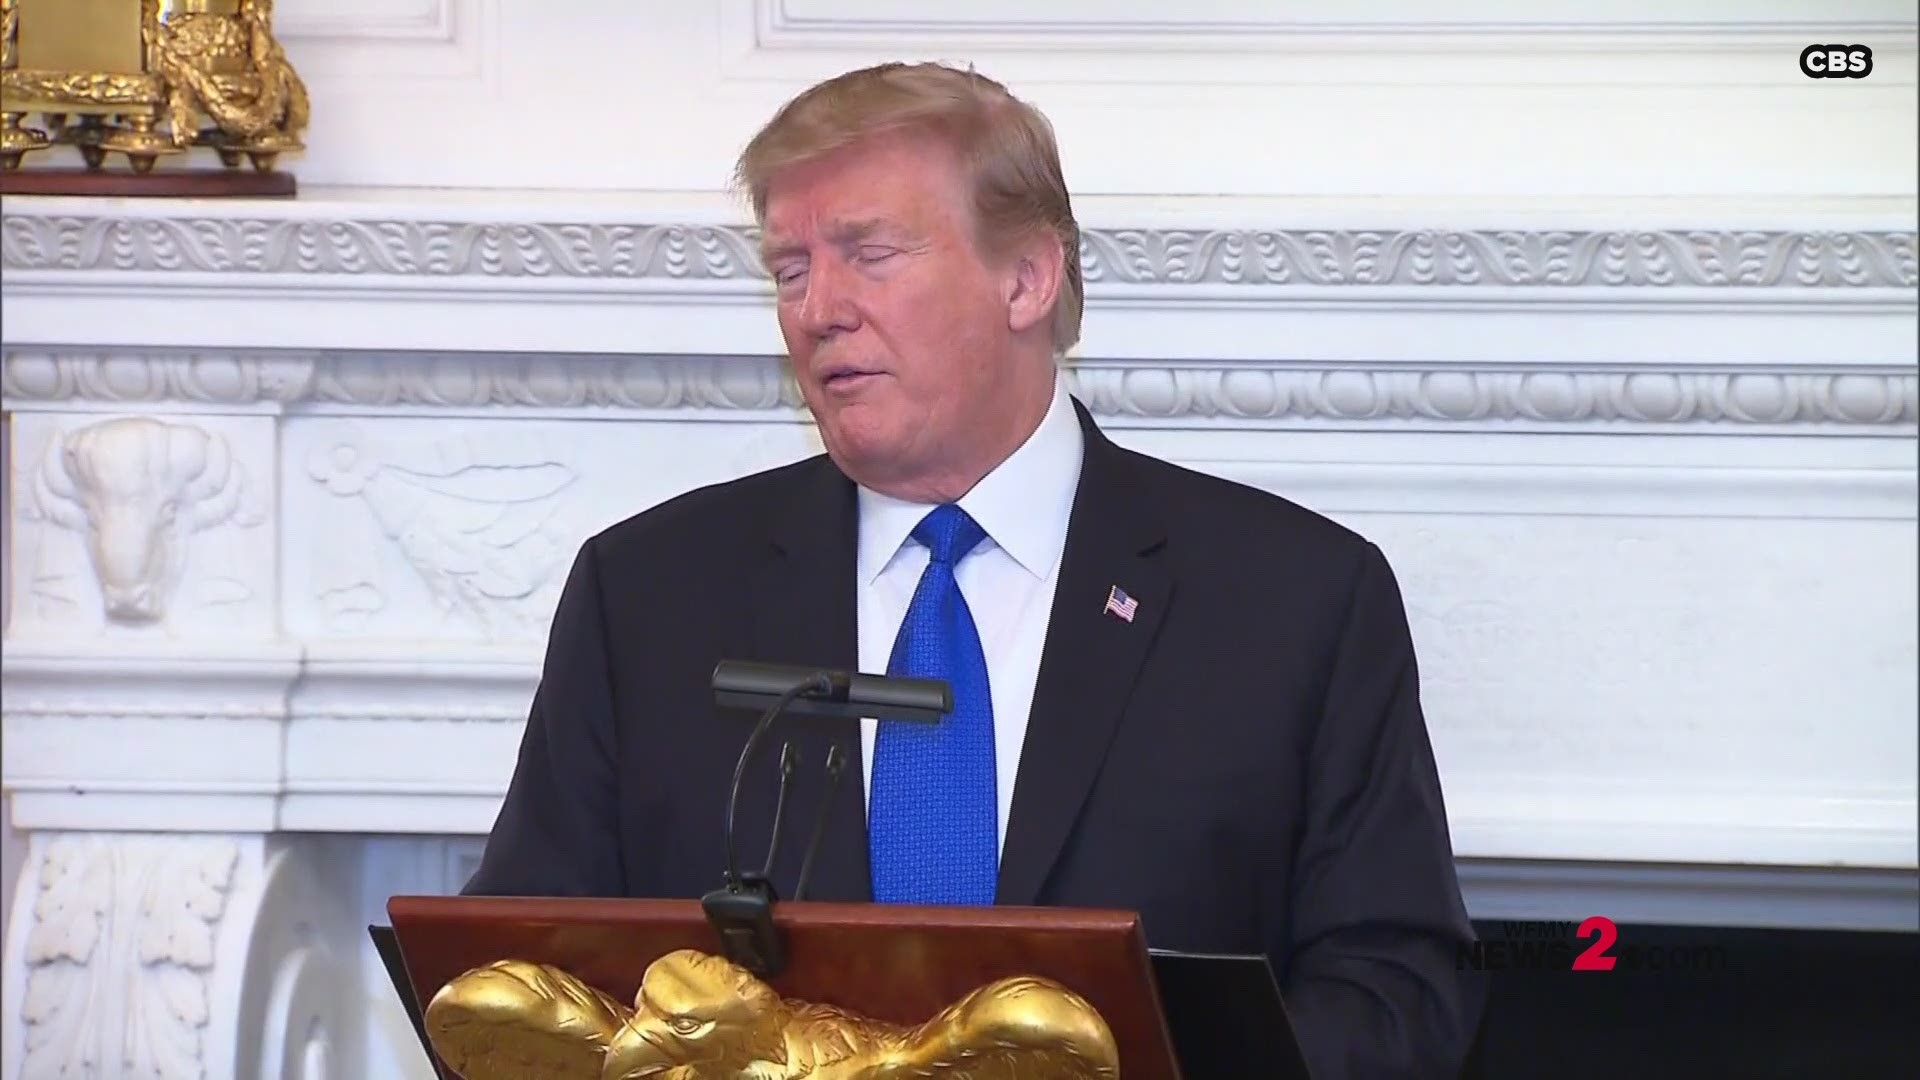 President Trump gives an update on the emergency declaration and the border wall and what’s next.